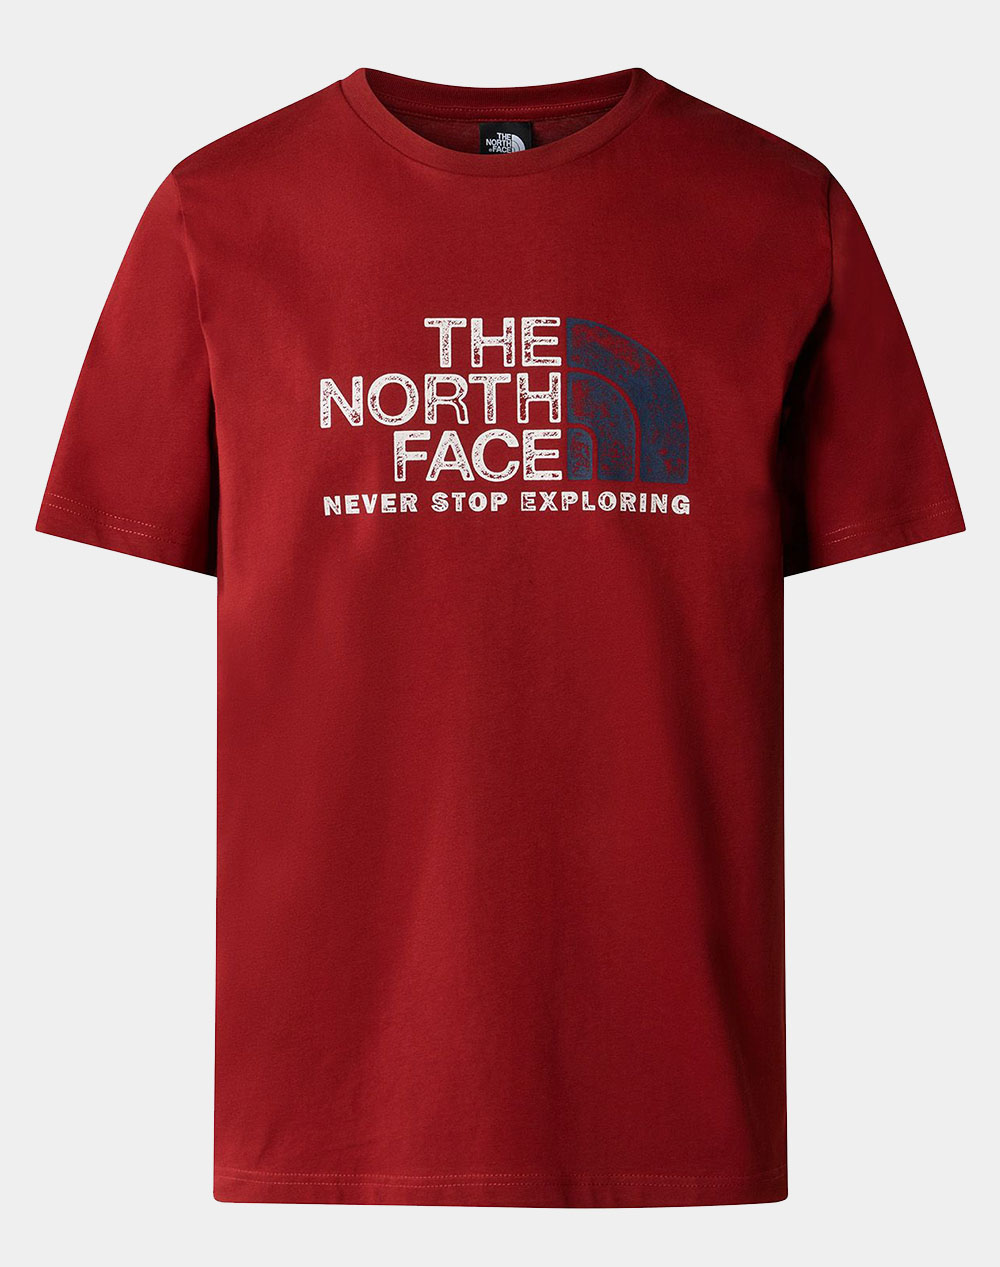 THE NORTH FACE M S/S RUST 2 TEE NF0A87NW-NFPOJ DarkRed 3820ATNFA3400017_XR29613